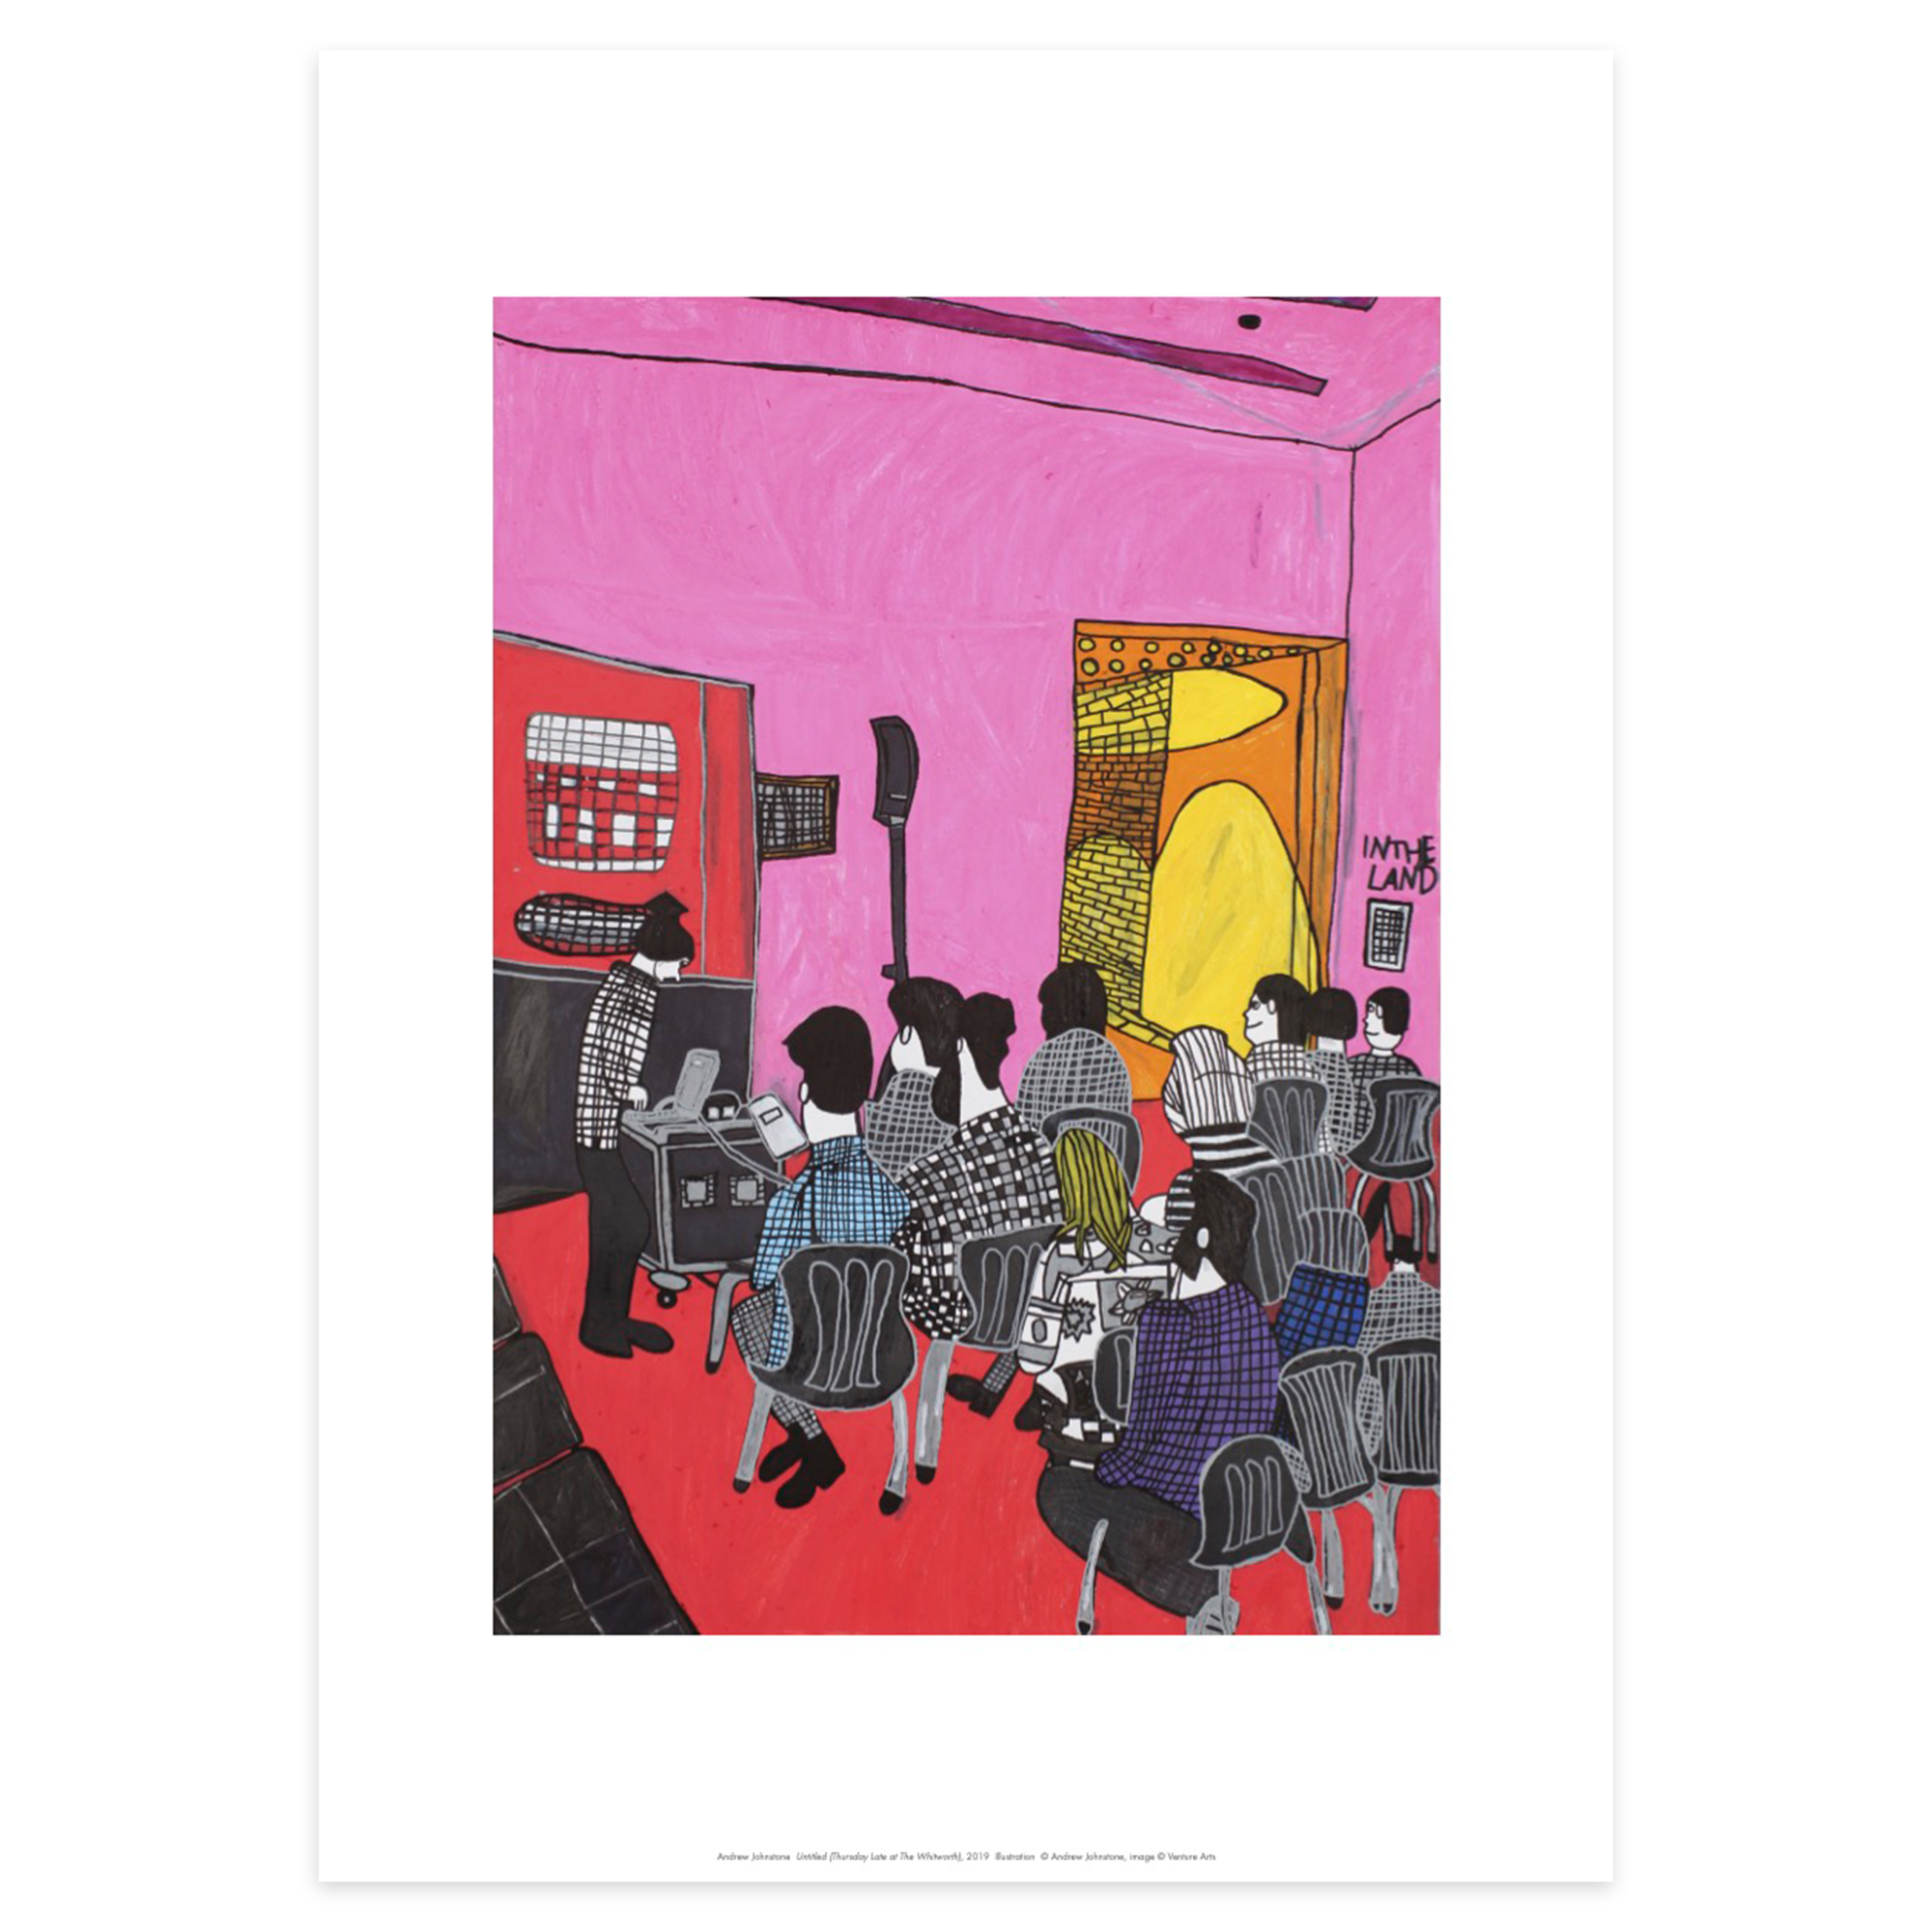 Reproduction of Andrew Johnstones artwork. A room full of people sat on chairs with pink walls.